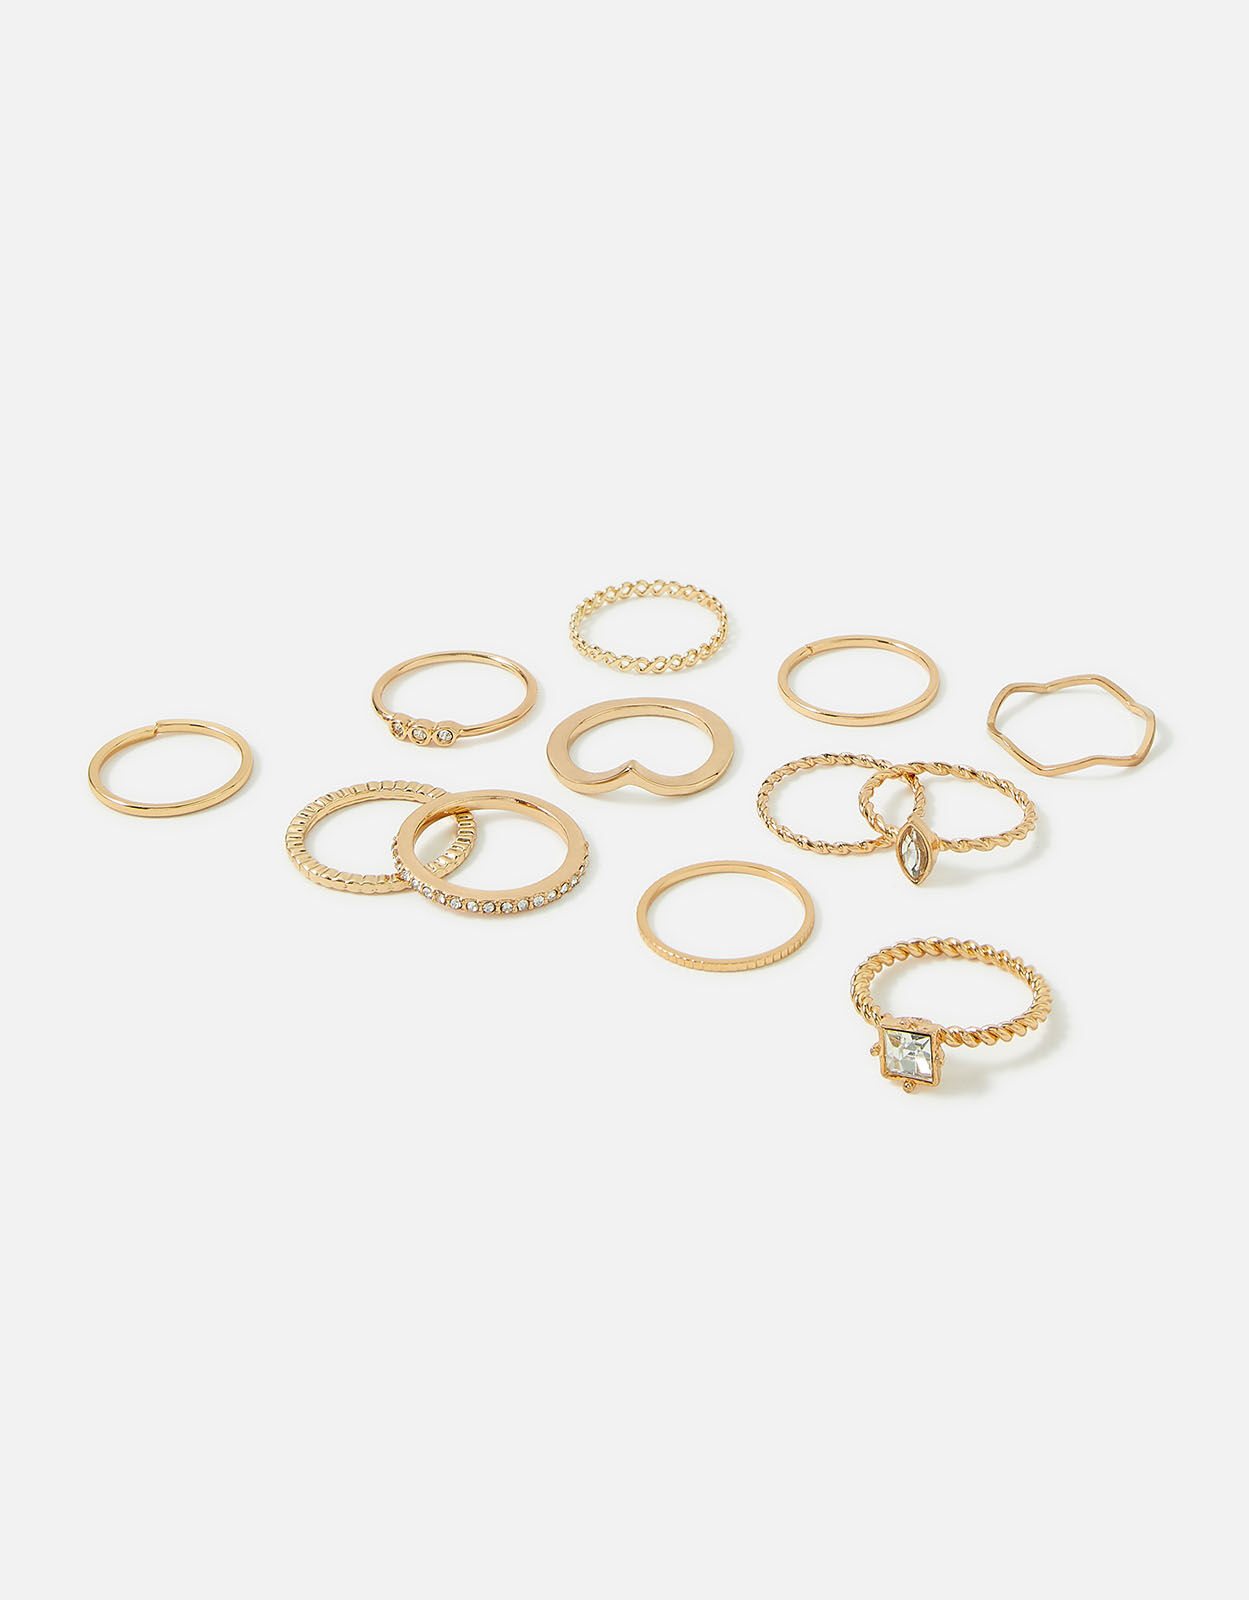 GOLD TONE SET OF 5 DIFFERENT CRYSTAL RINGS Accessorize ACCESSORIZE SIZE M 